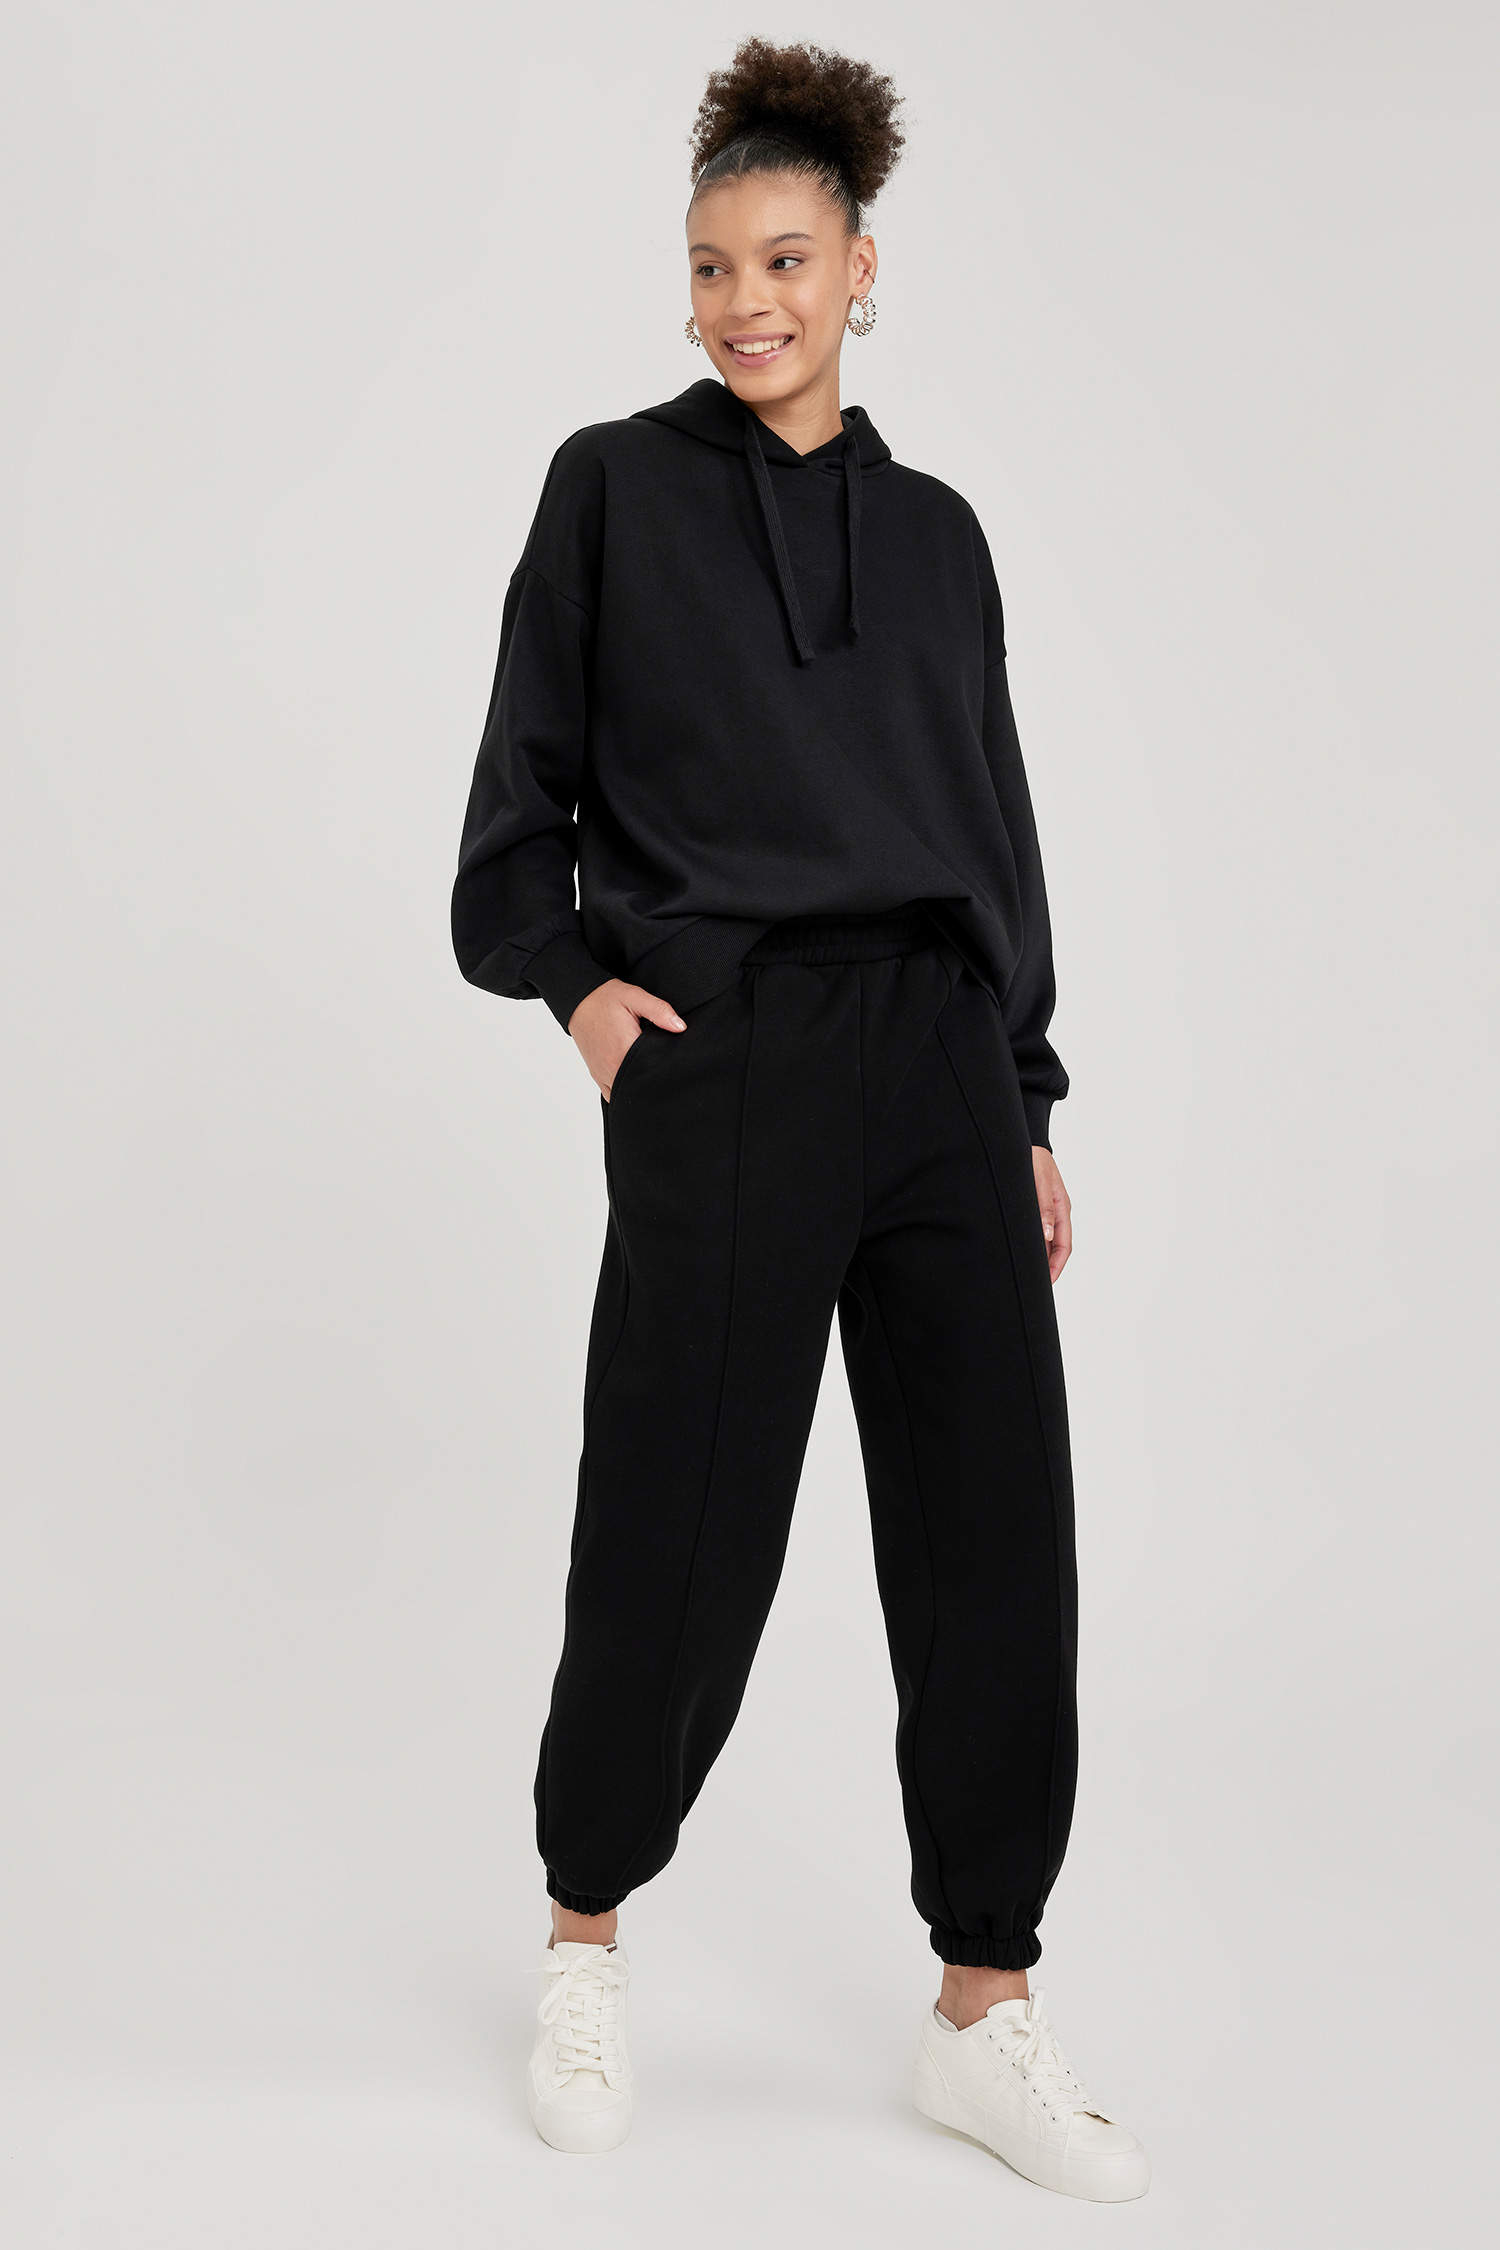 Black WOMAN jogger Thick Sweatshirt Fabric Trousers 2843381 | DeFacto